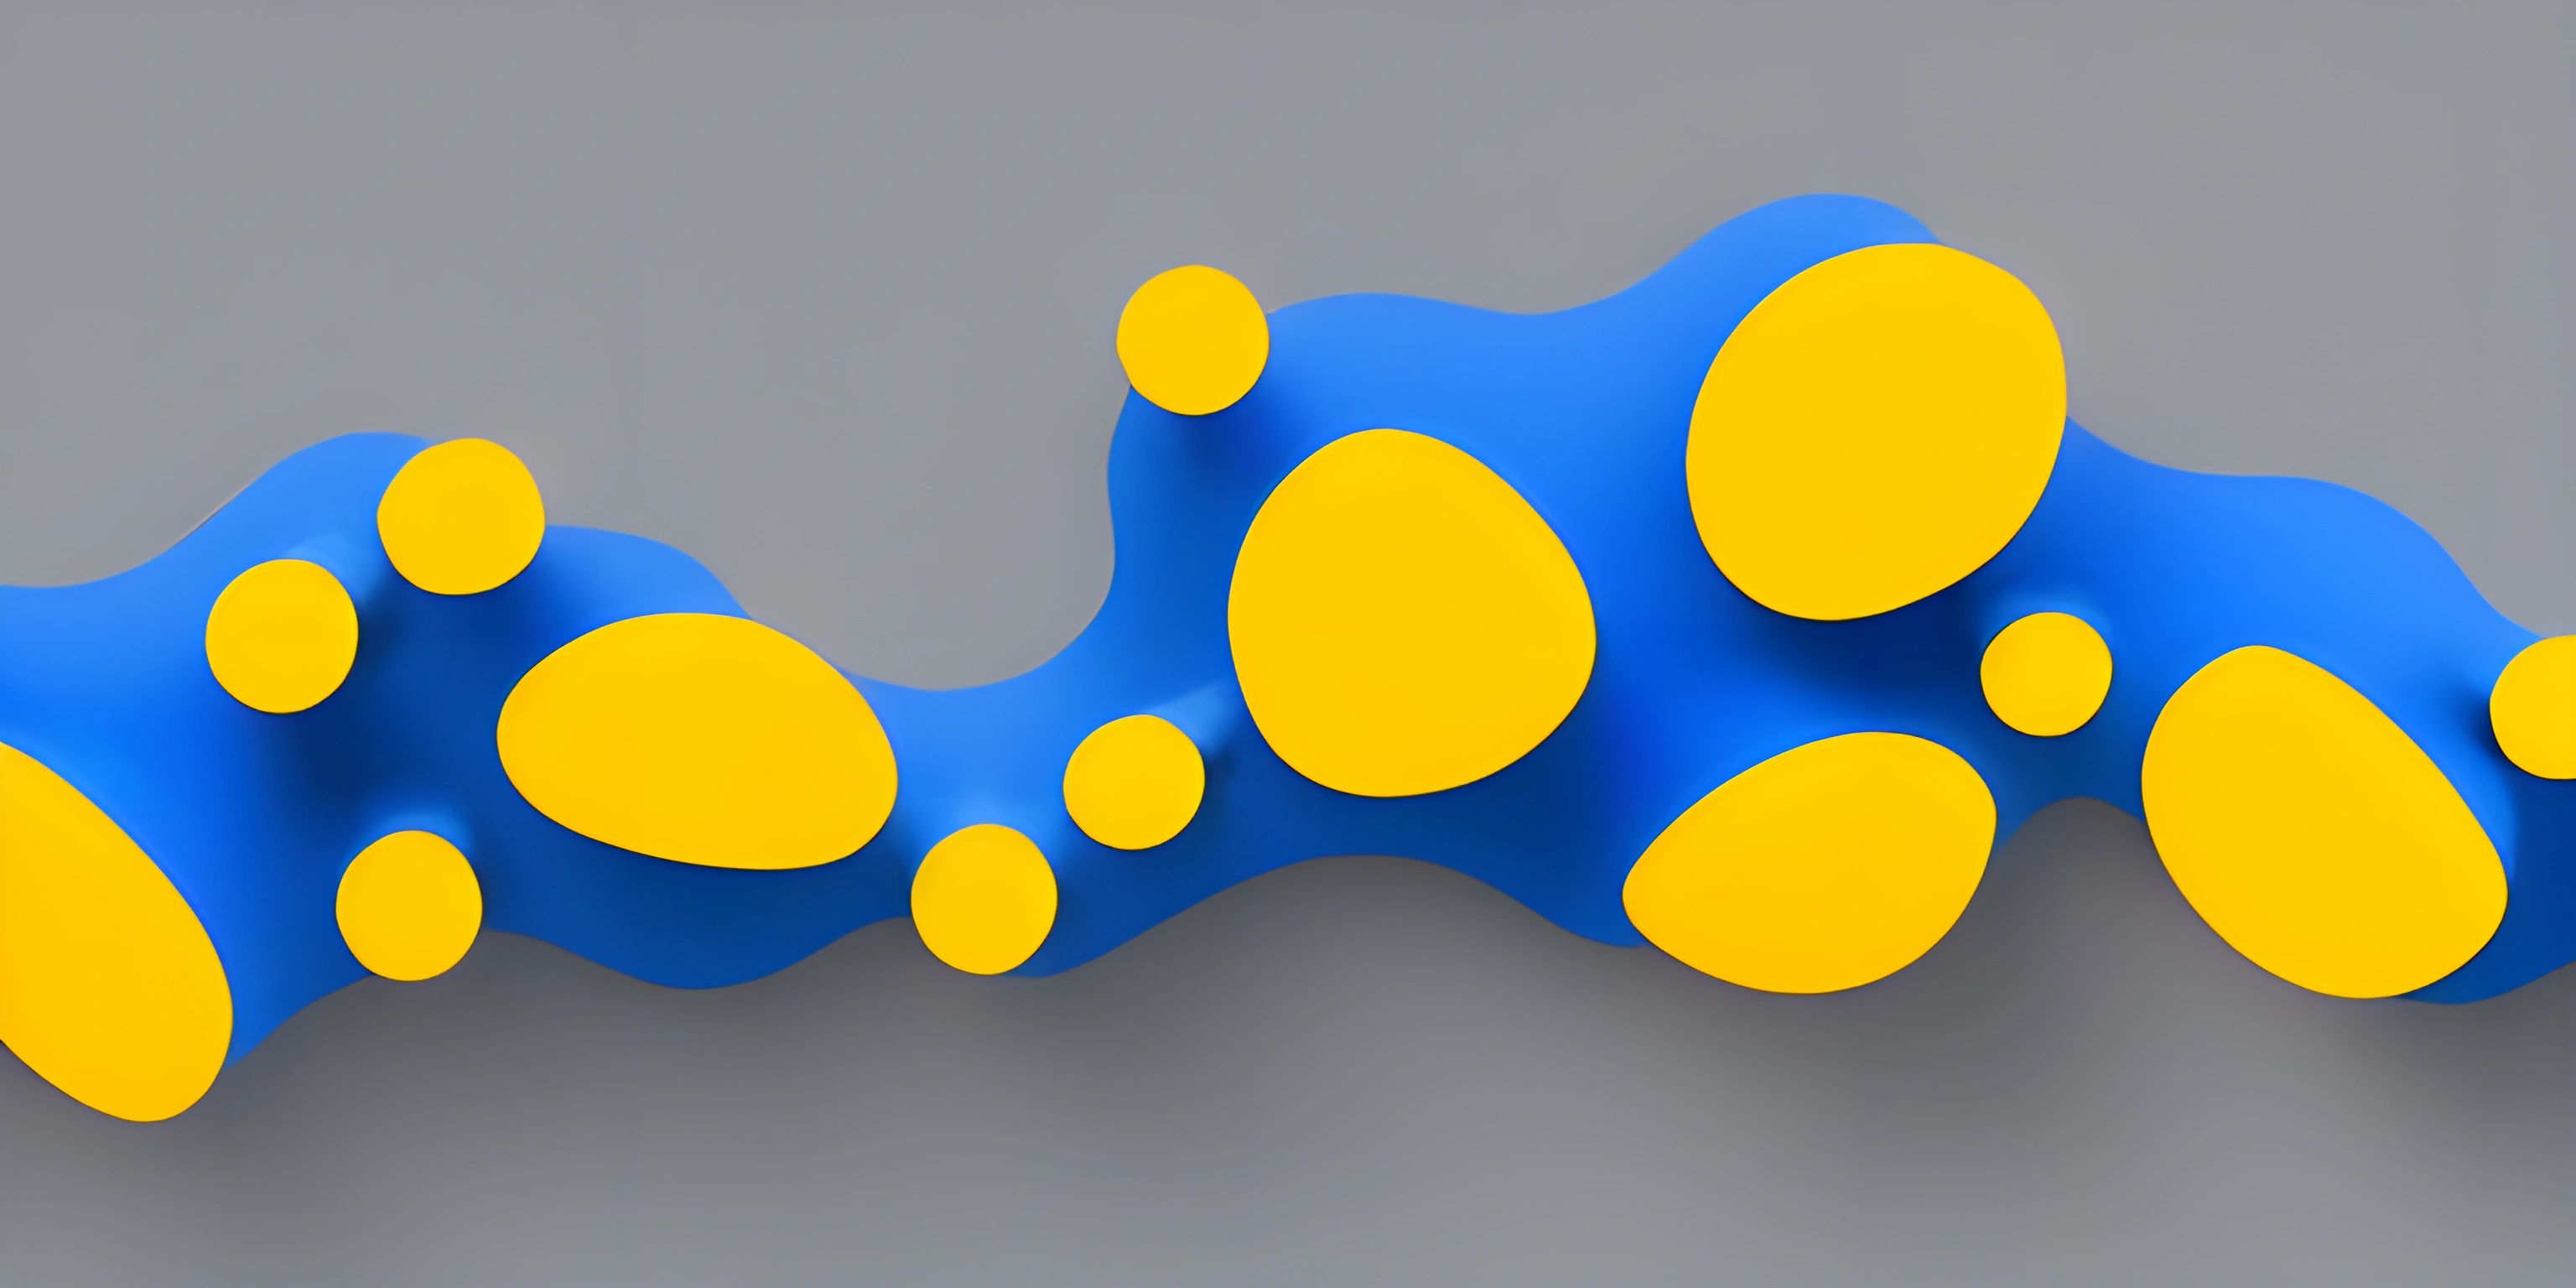 several yellow and blue shapes and dots flying around them on a gray background, including the dots coming out of each other,